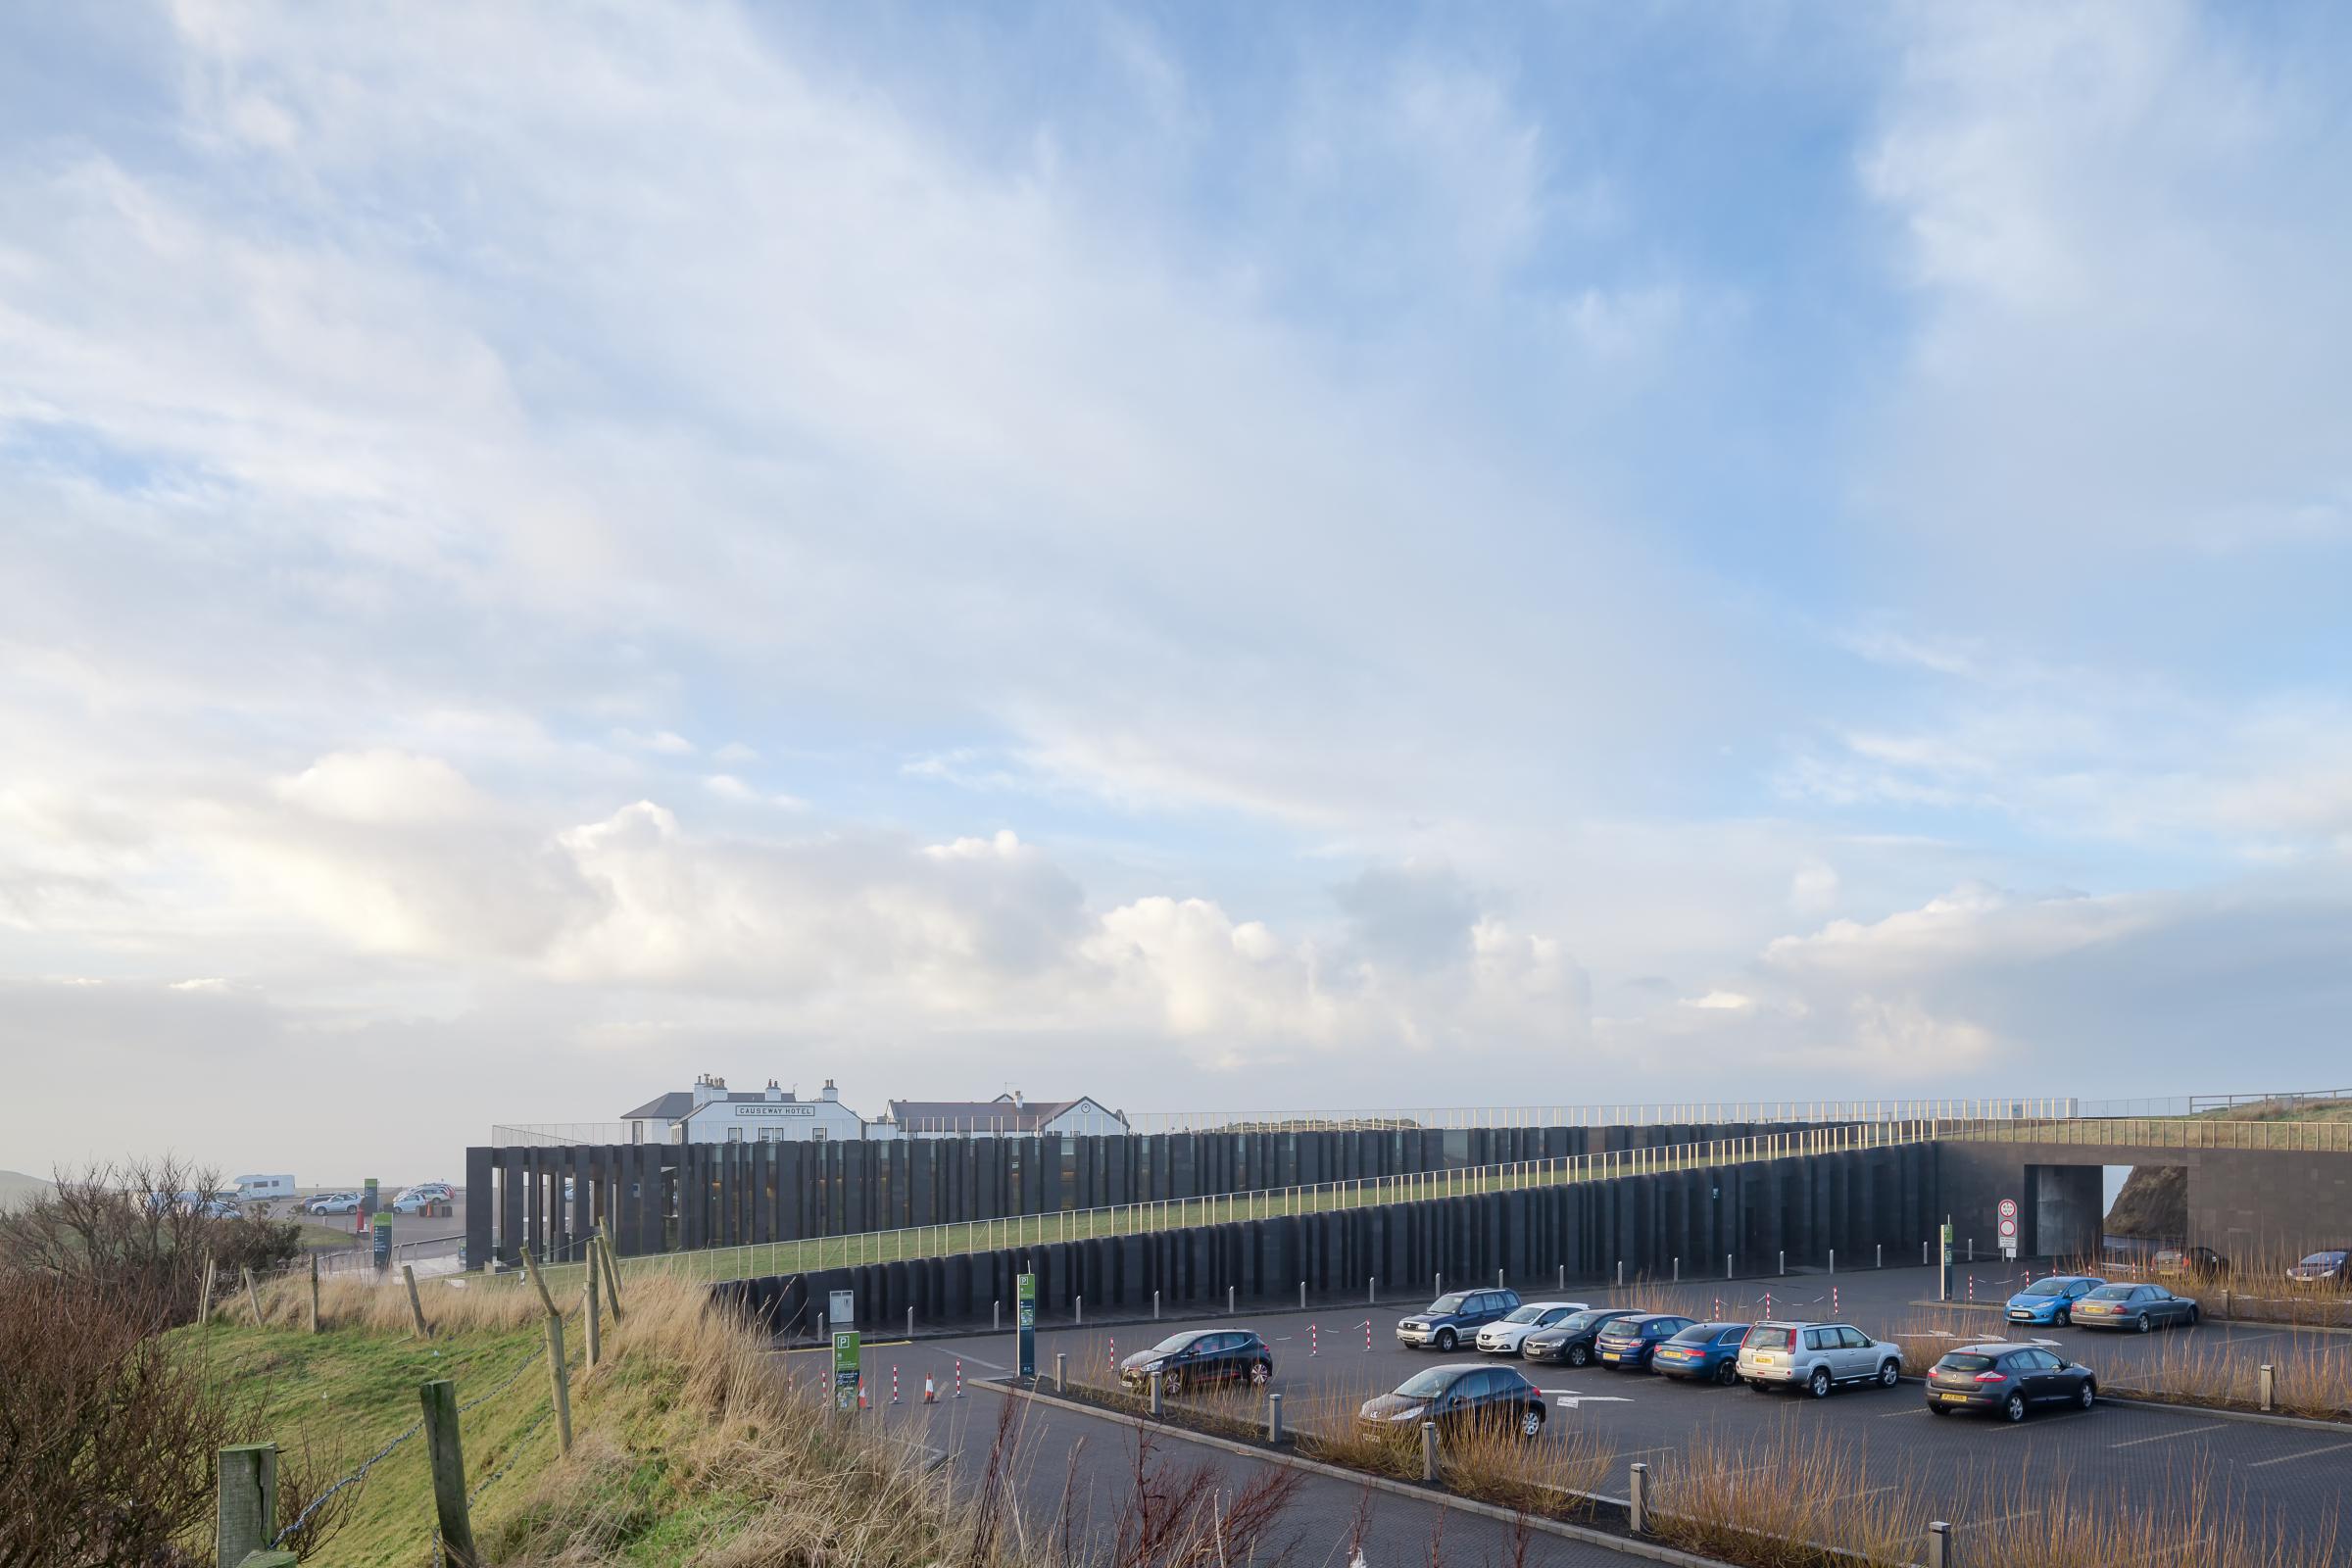 Photograph of Giants Causway Visitor Centre, designed by Heneghan Peng Architects and located in Bushmills, United Kingdom